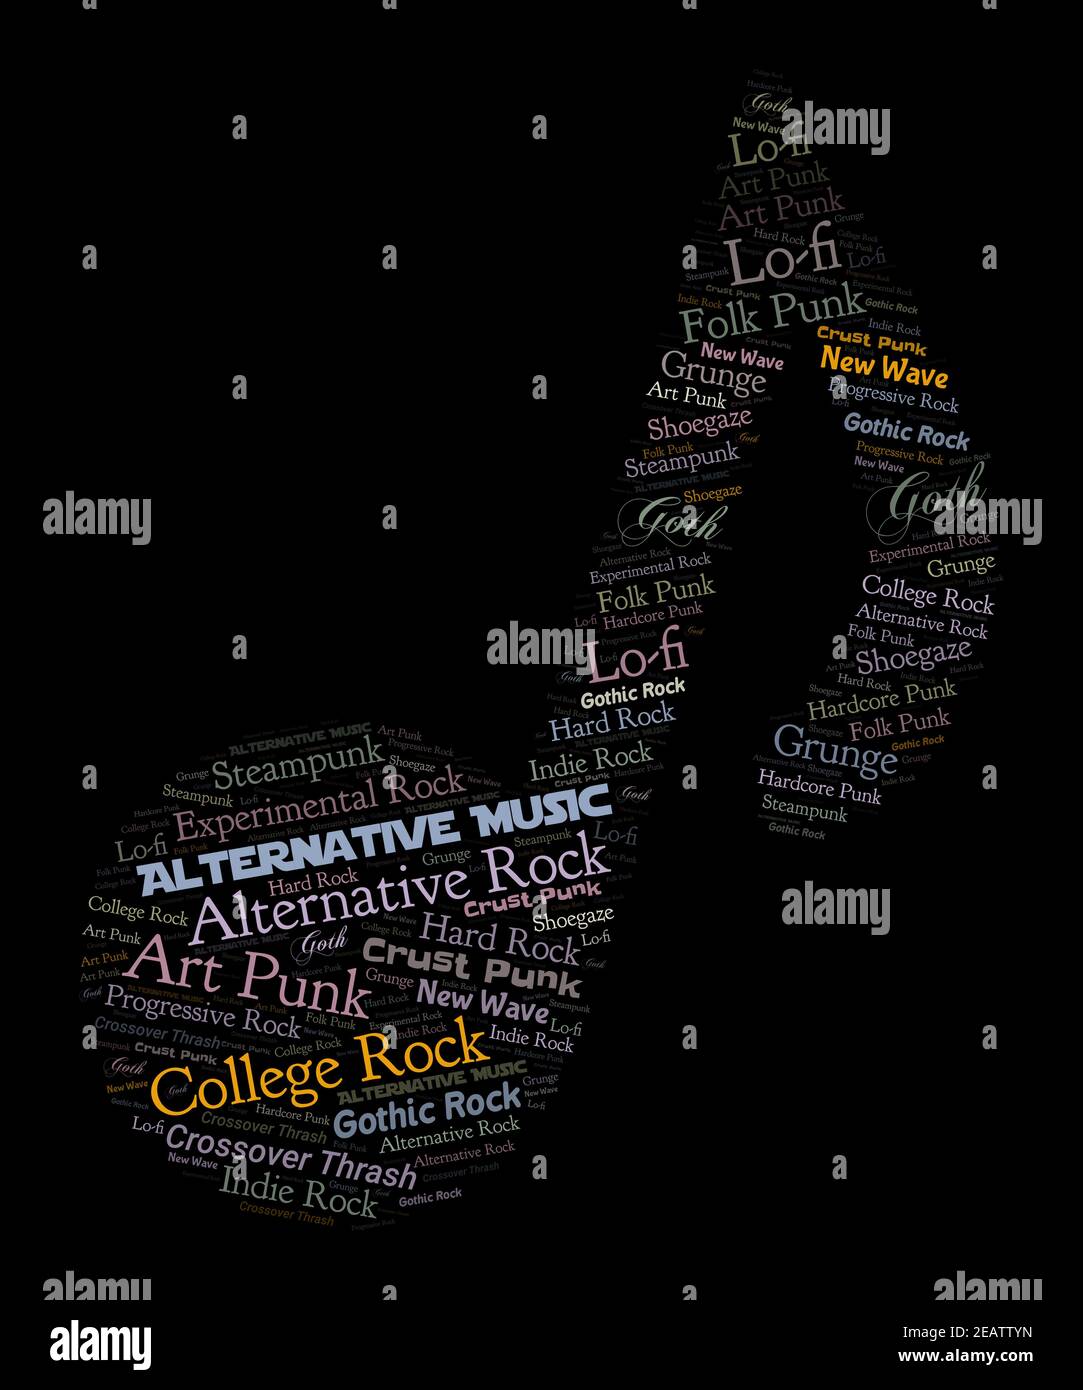 Alternative music word cloud graphic in a music note, features the subgenres of lo-fi, new wave, crust punk, grunge, art punk, gothic rock, alternativ Stock Photo